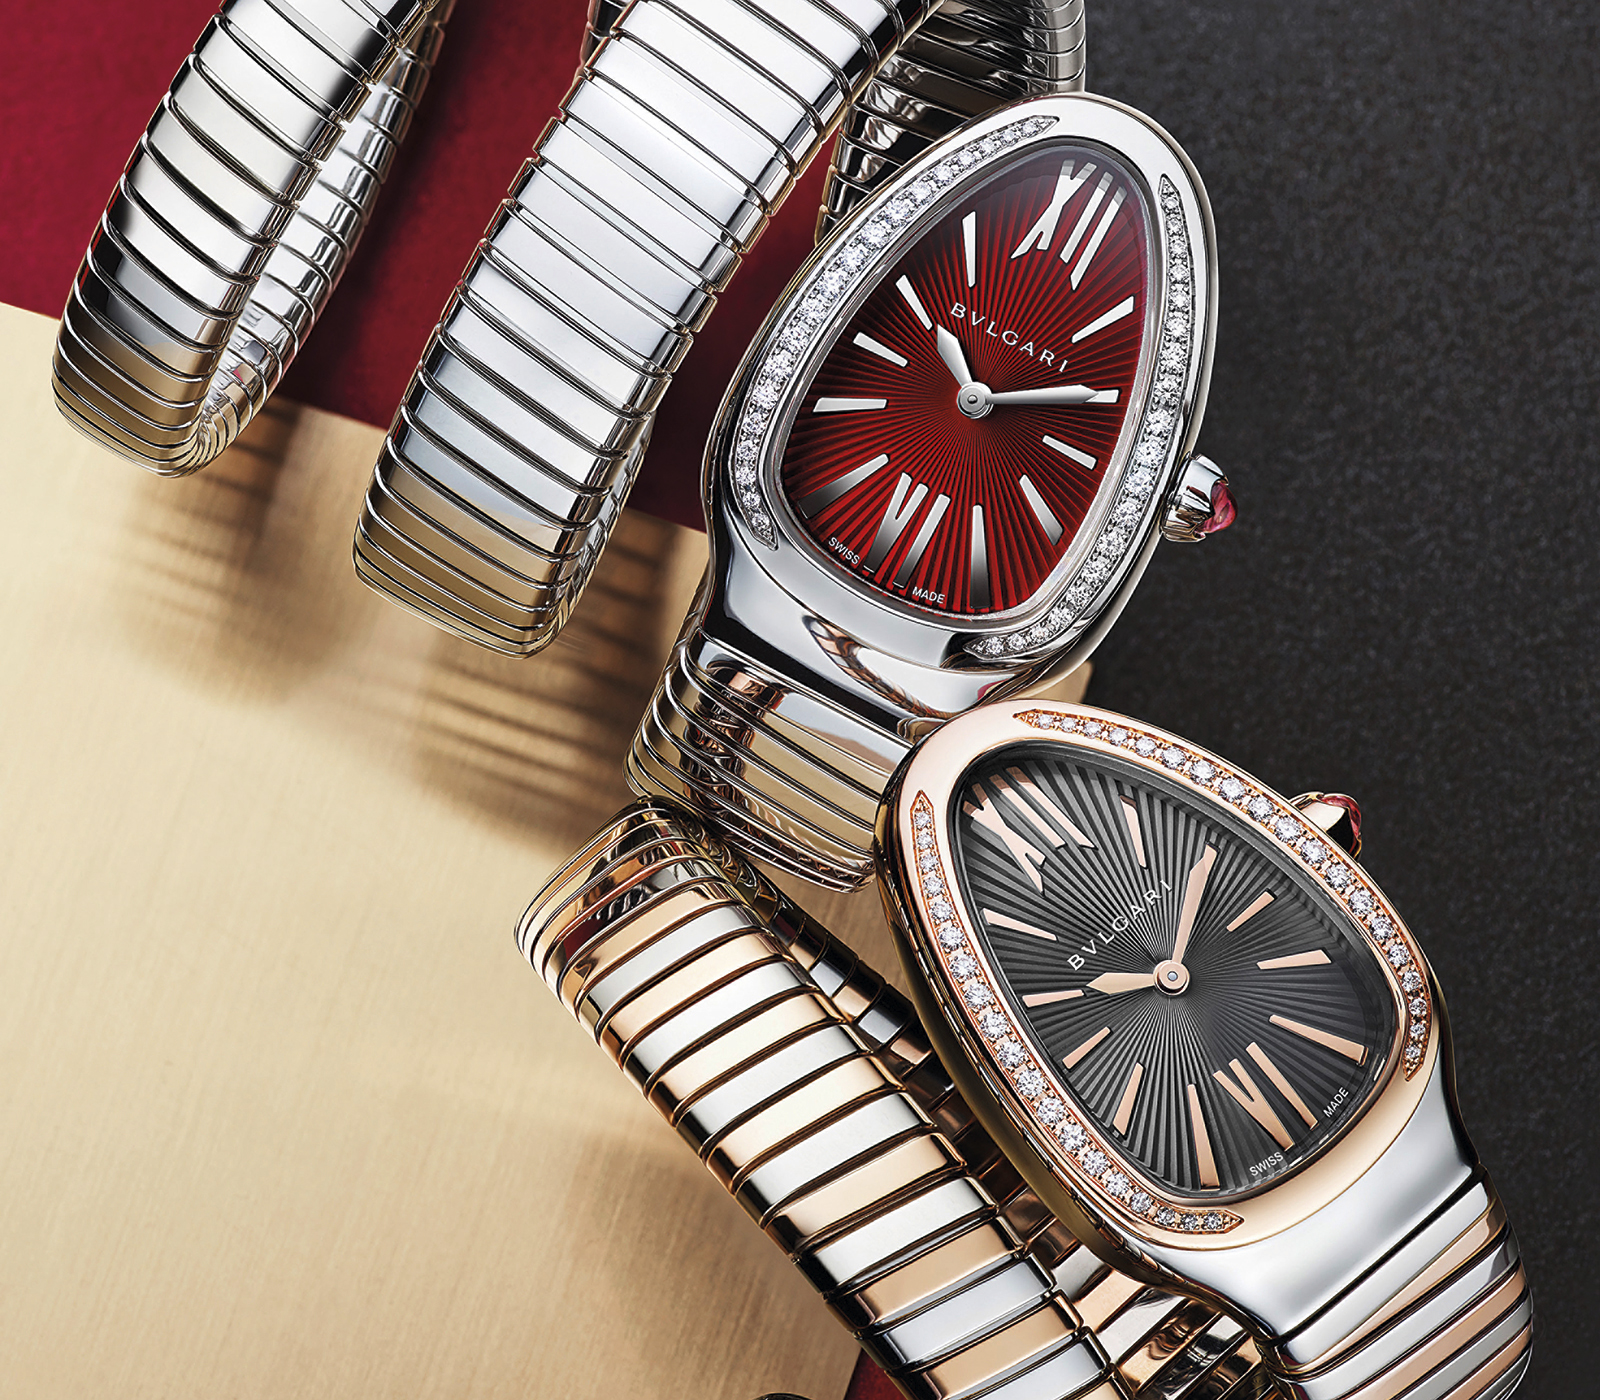 Bvlgari's Serpenti Tubogas watches are a bold yet wearable reimagining of the House's iconic snake silhouette